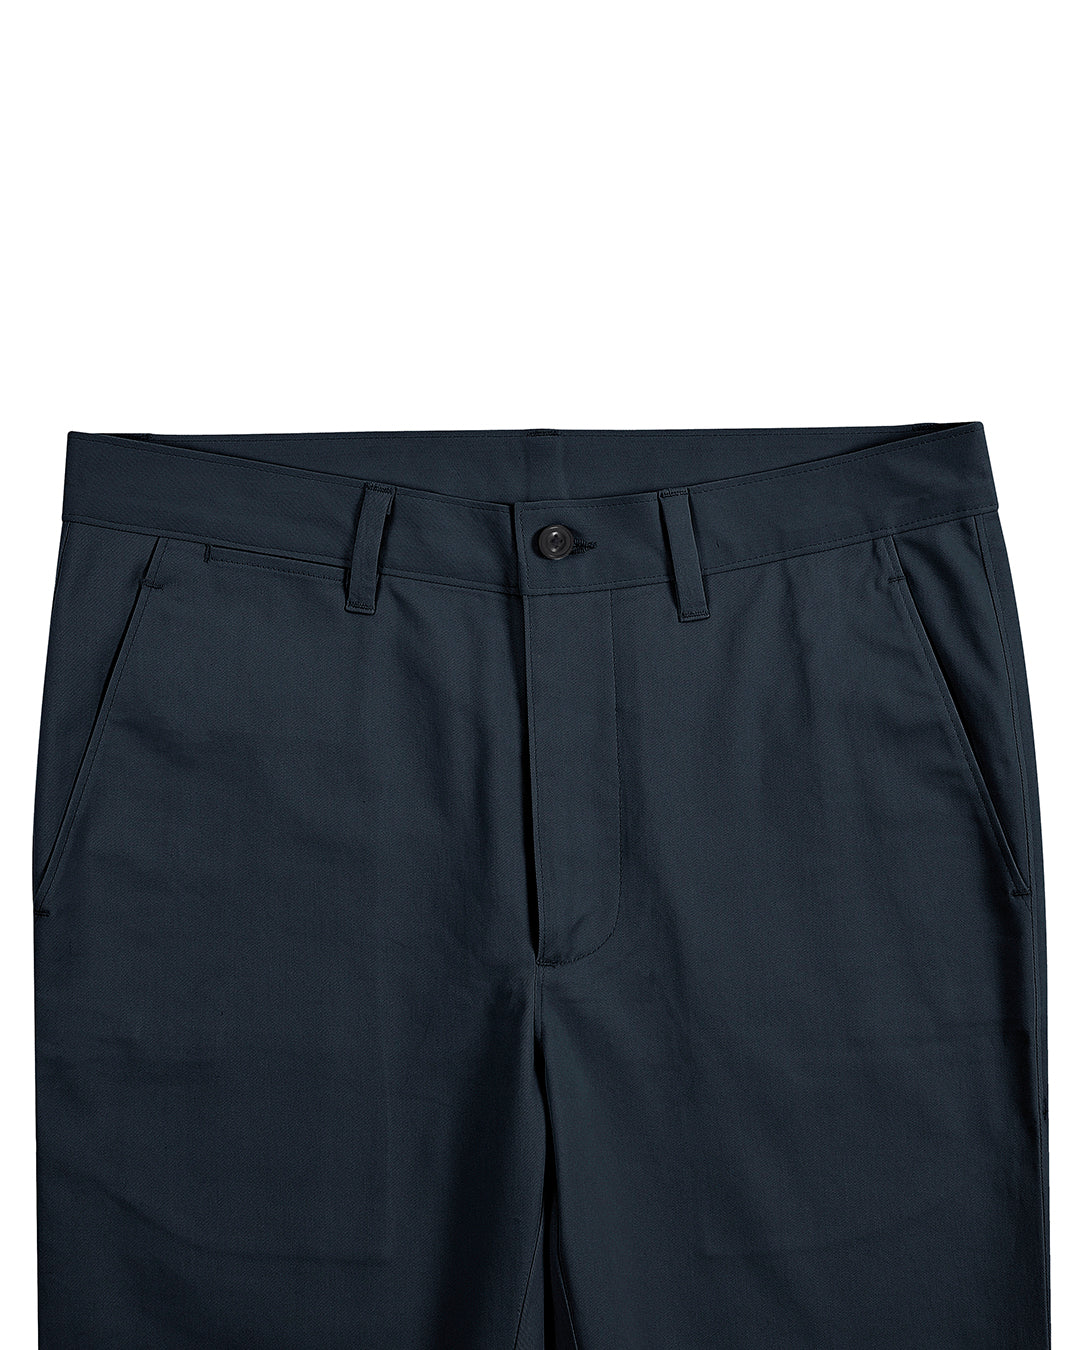 Front view of custom Genoa Chino pants for men by Luxire in dark teal blue